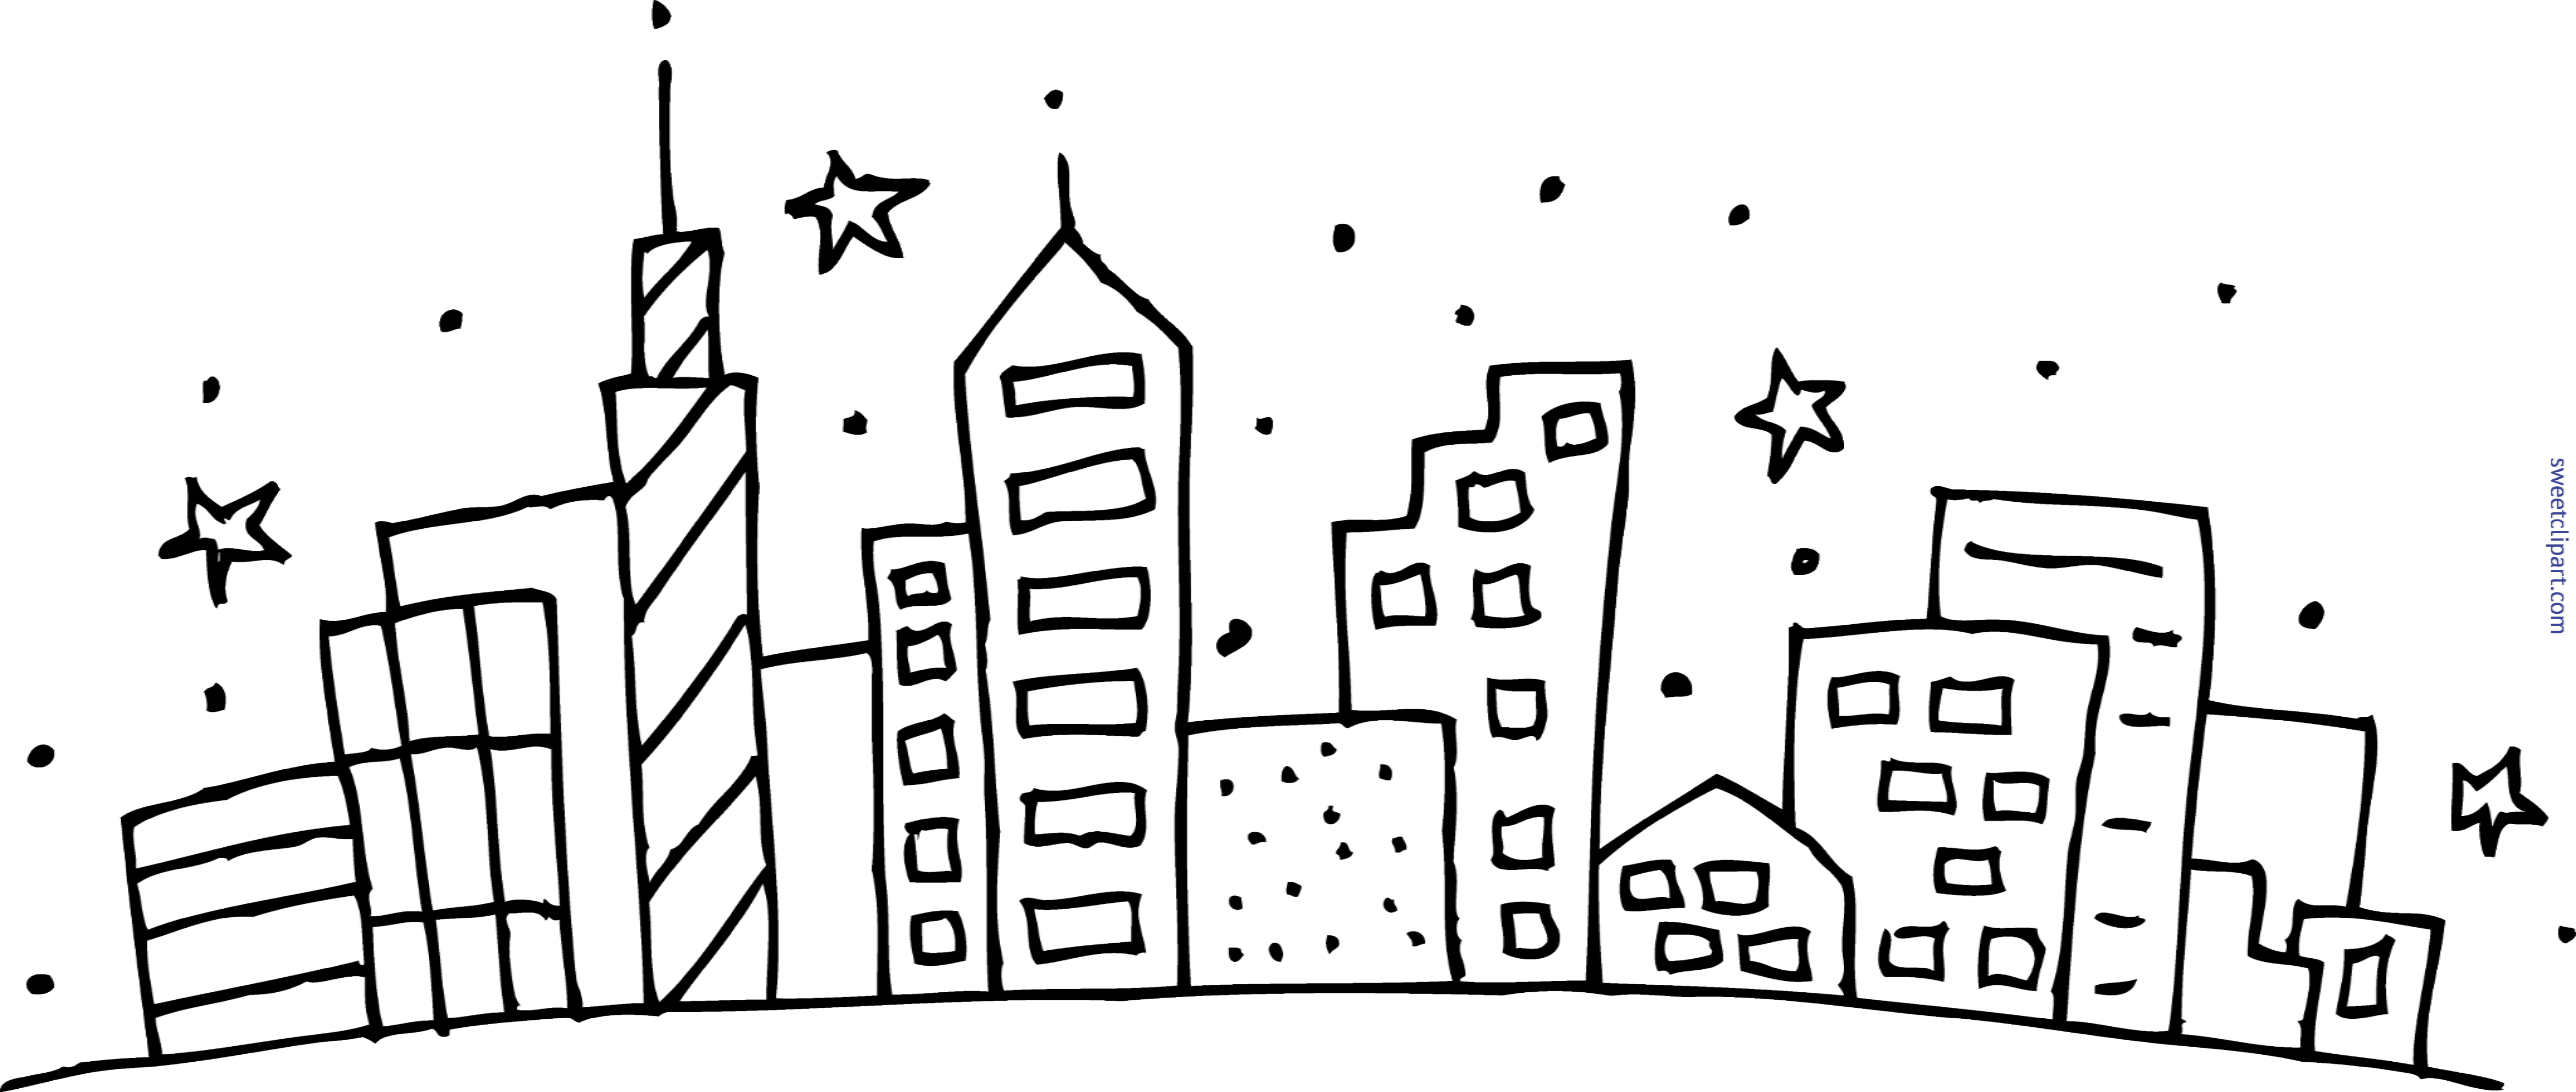 Cityscape Coloring Page City Sketch Coloring Page